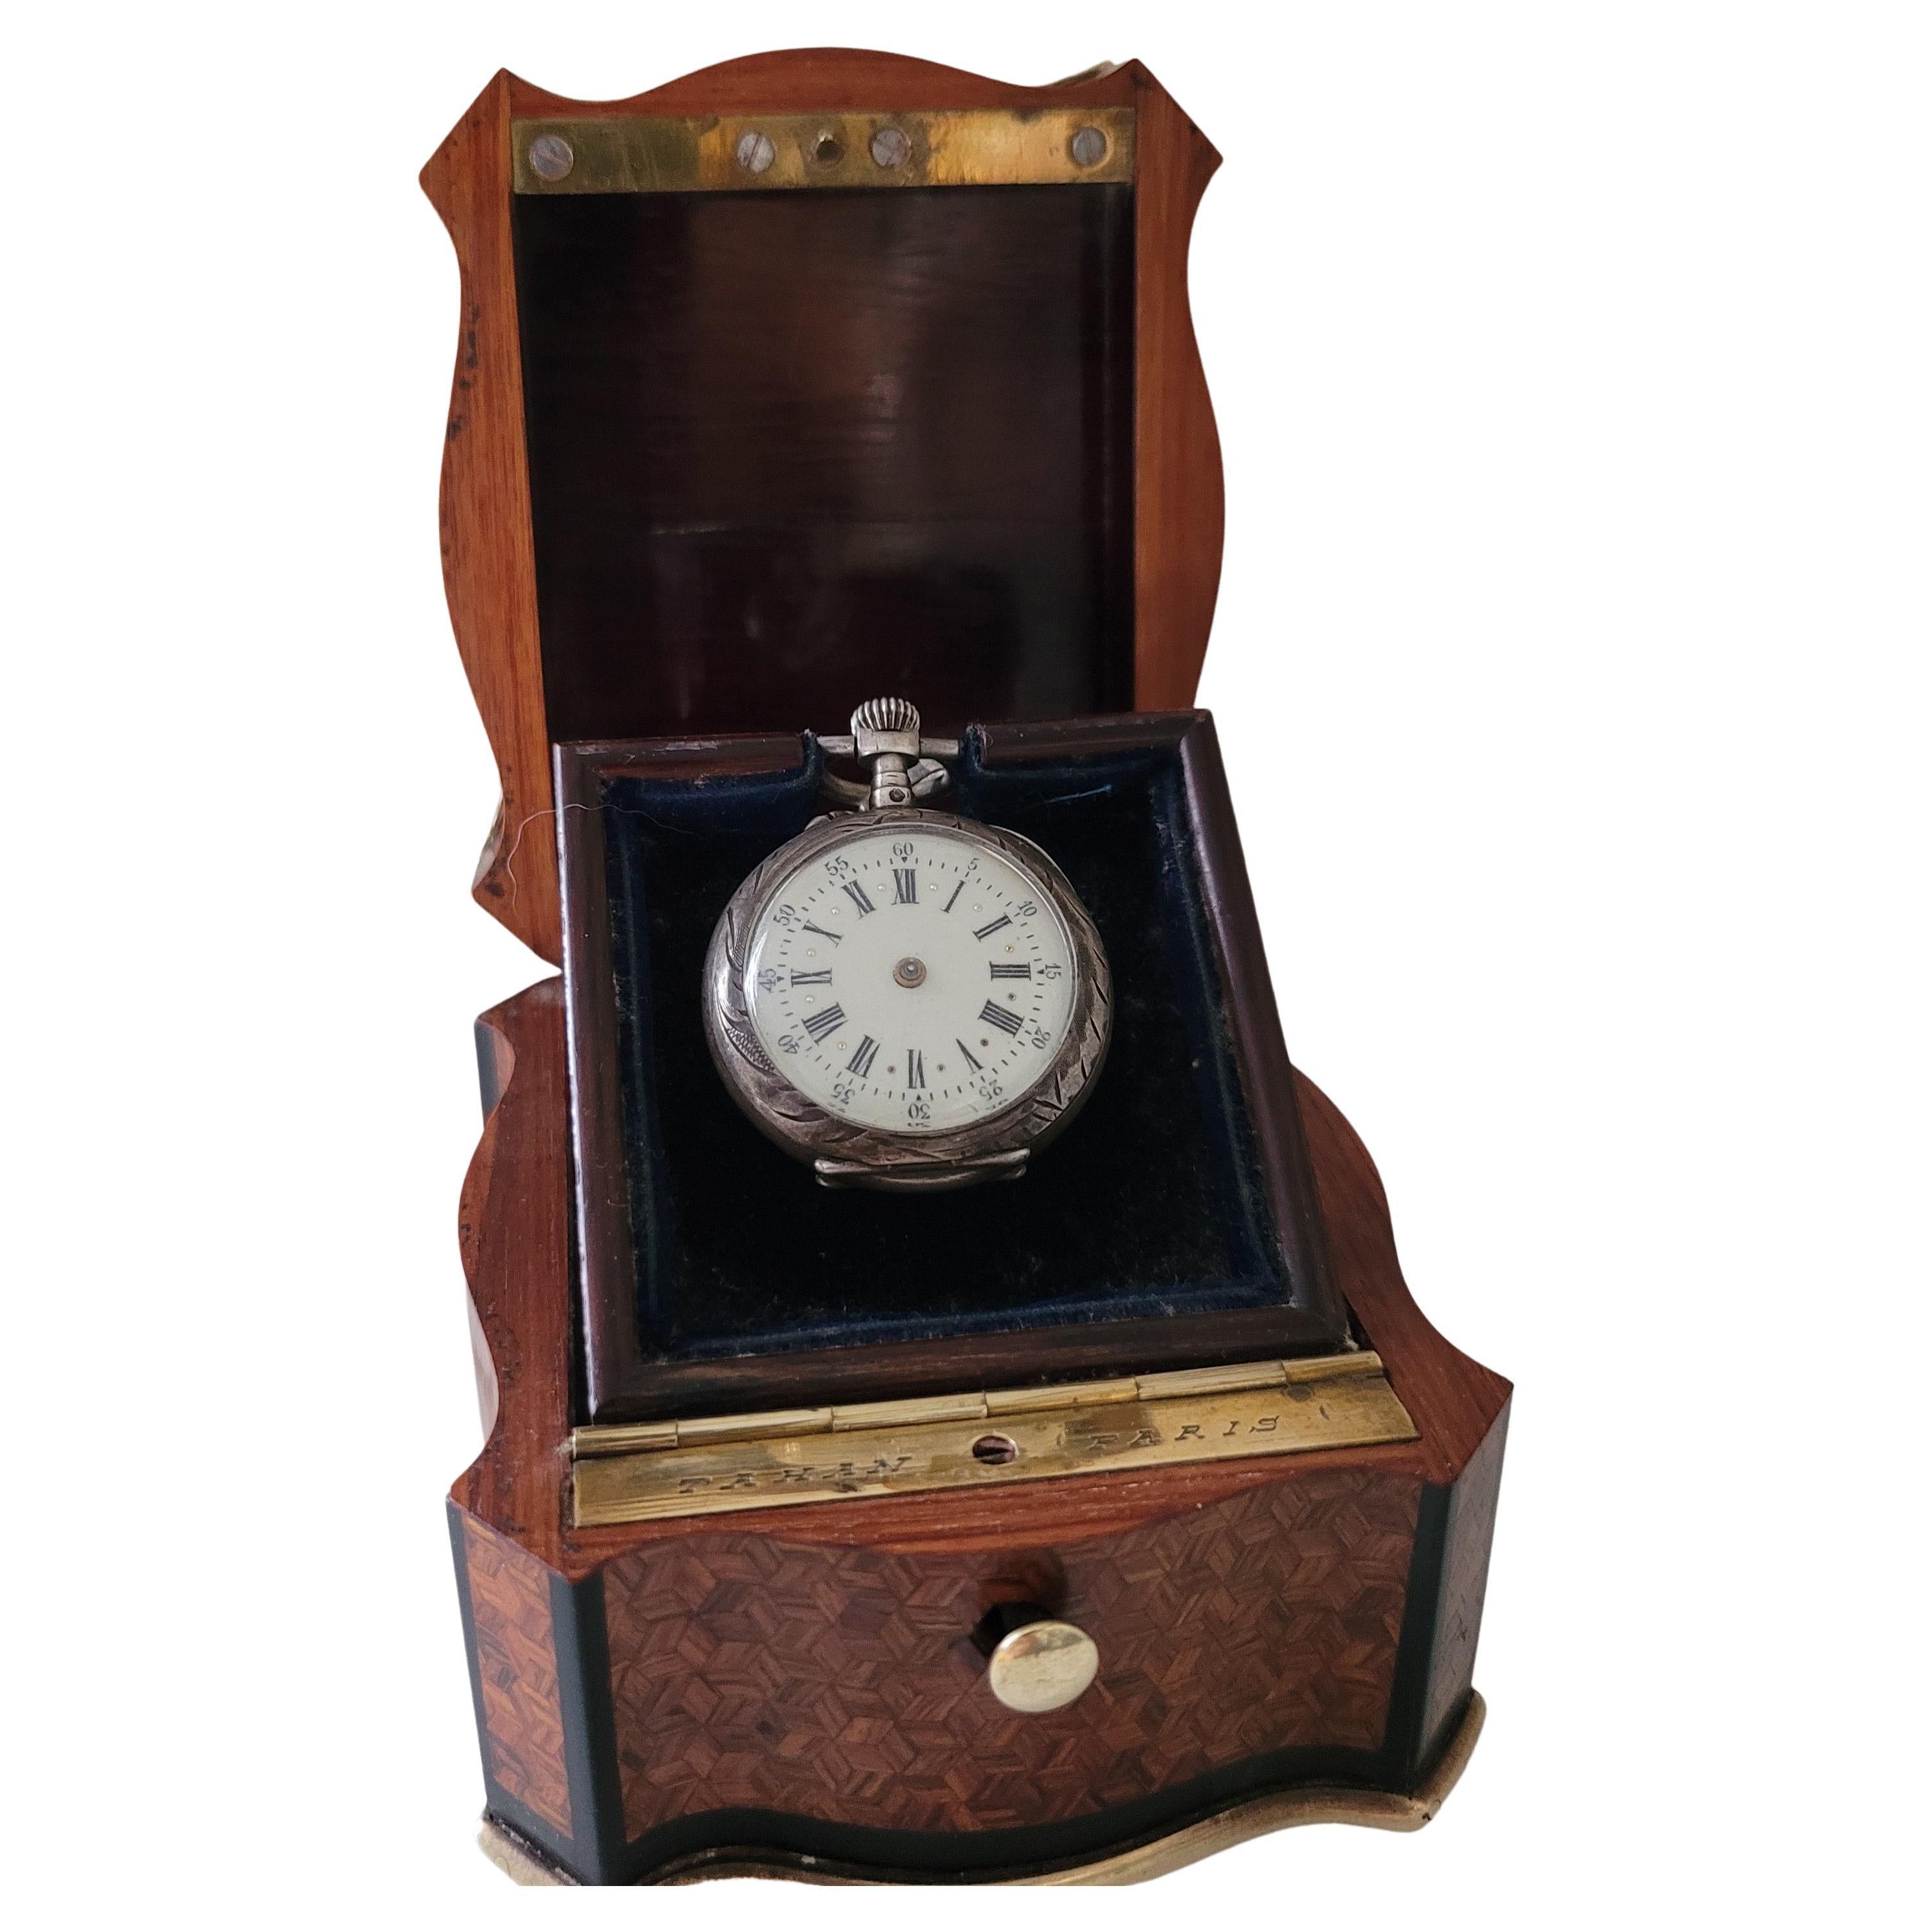 TAHAN Watch Holder, Napoleon 3 Period Rosewood and Ebony Marquetry, Good Cond.